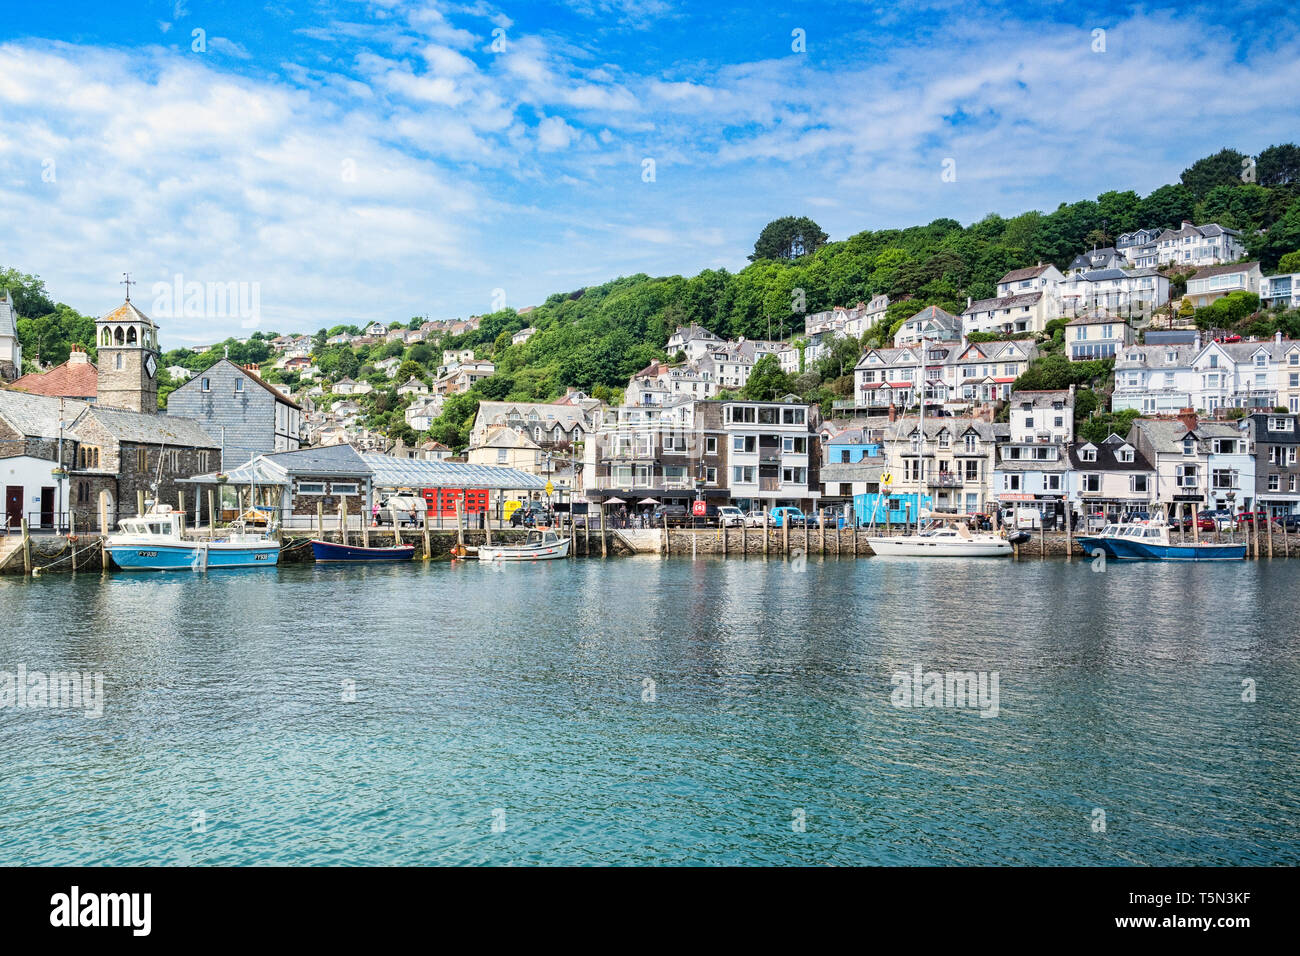 6 June 2018: Looe, Cornwall, UK - The small coastal town of Looe, with the River Looe and hillside houses. Stock Photo